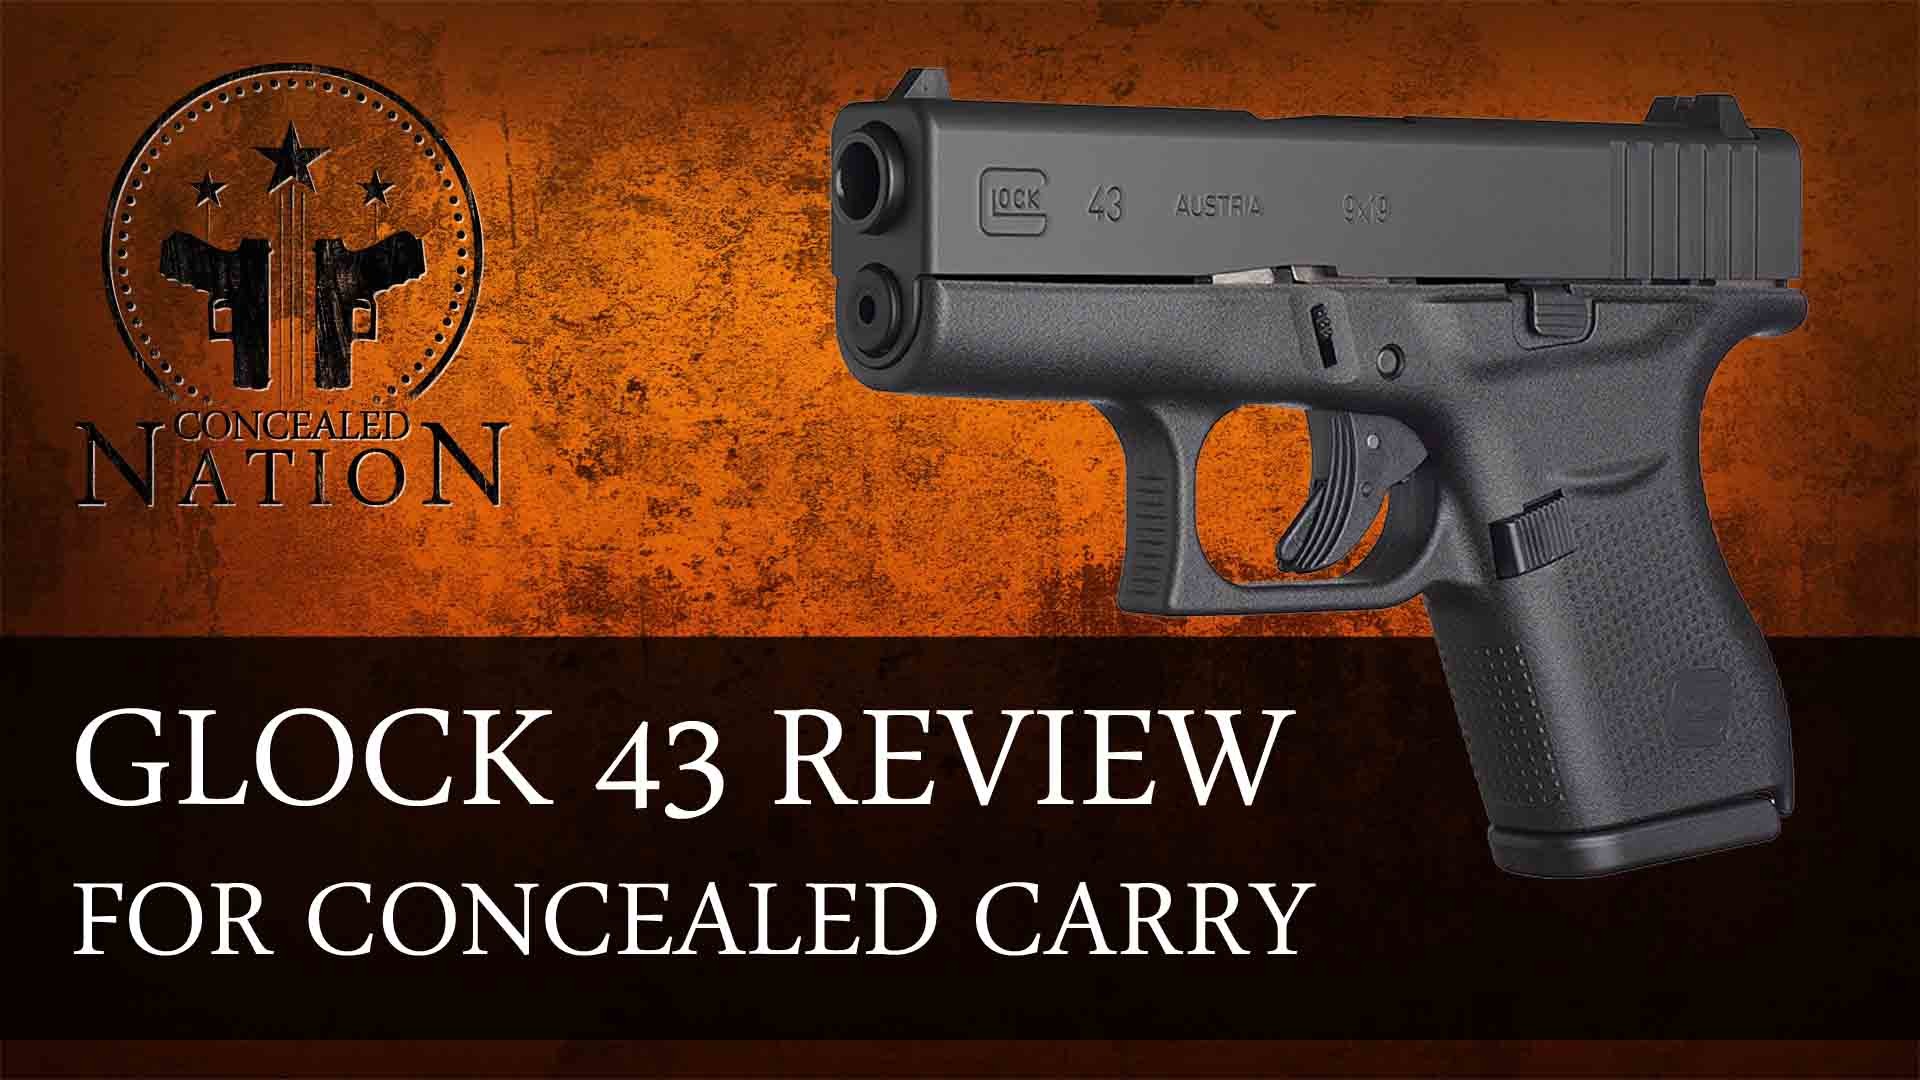 1920x1080 [FIREARM REVIEW] Glock 43 Review For Concealed Carry – Concealed Nation